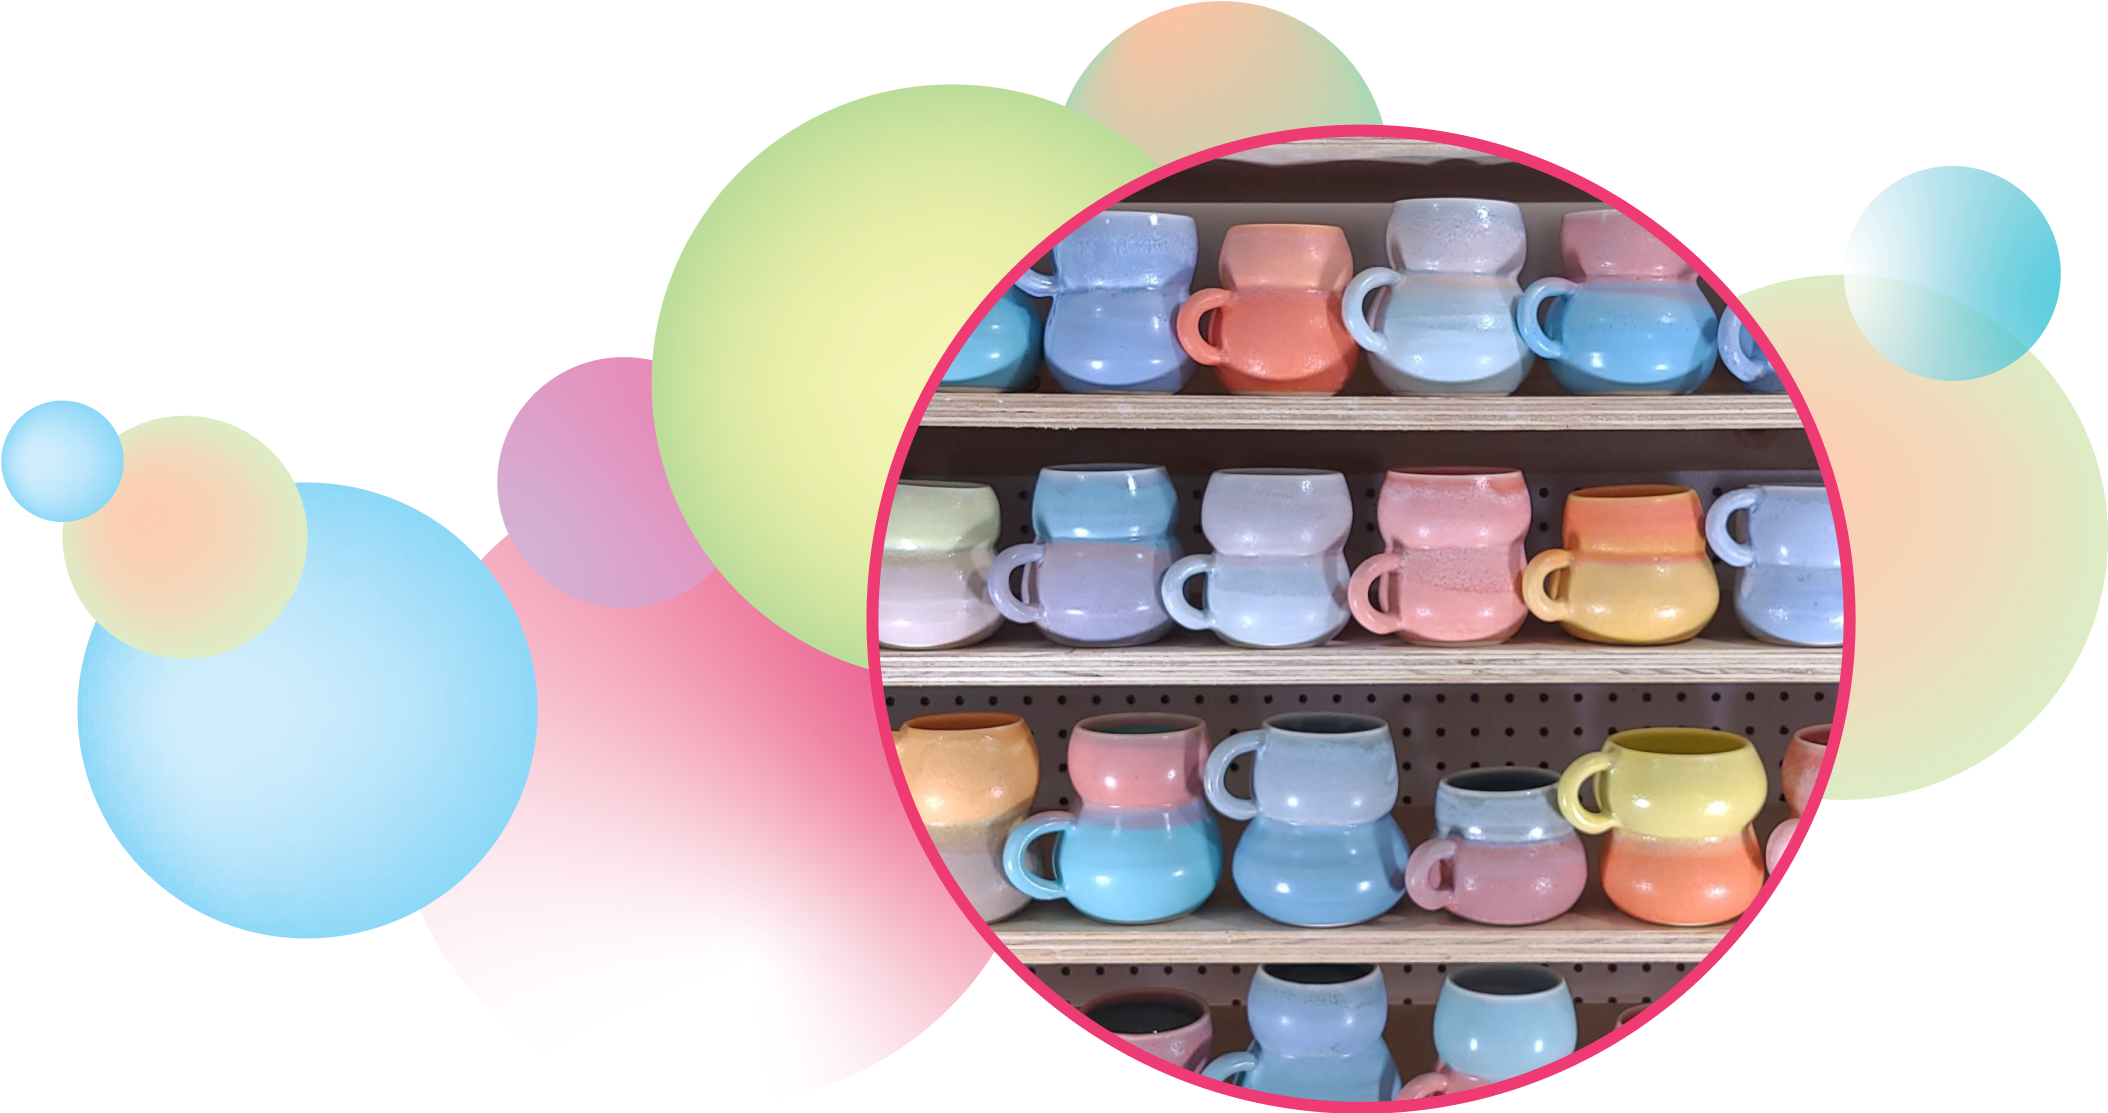 Image of many mugs on a shelf in the studio